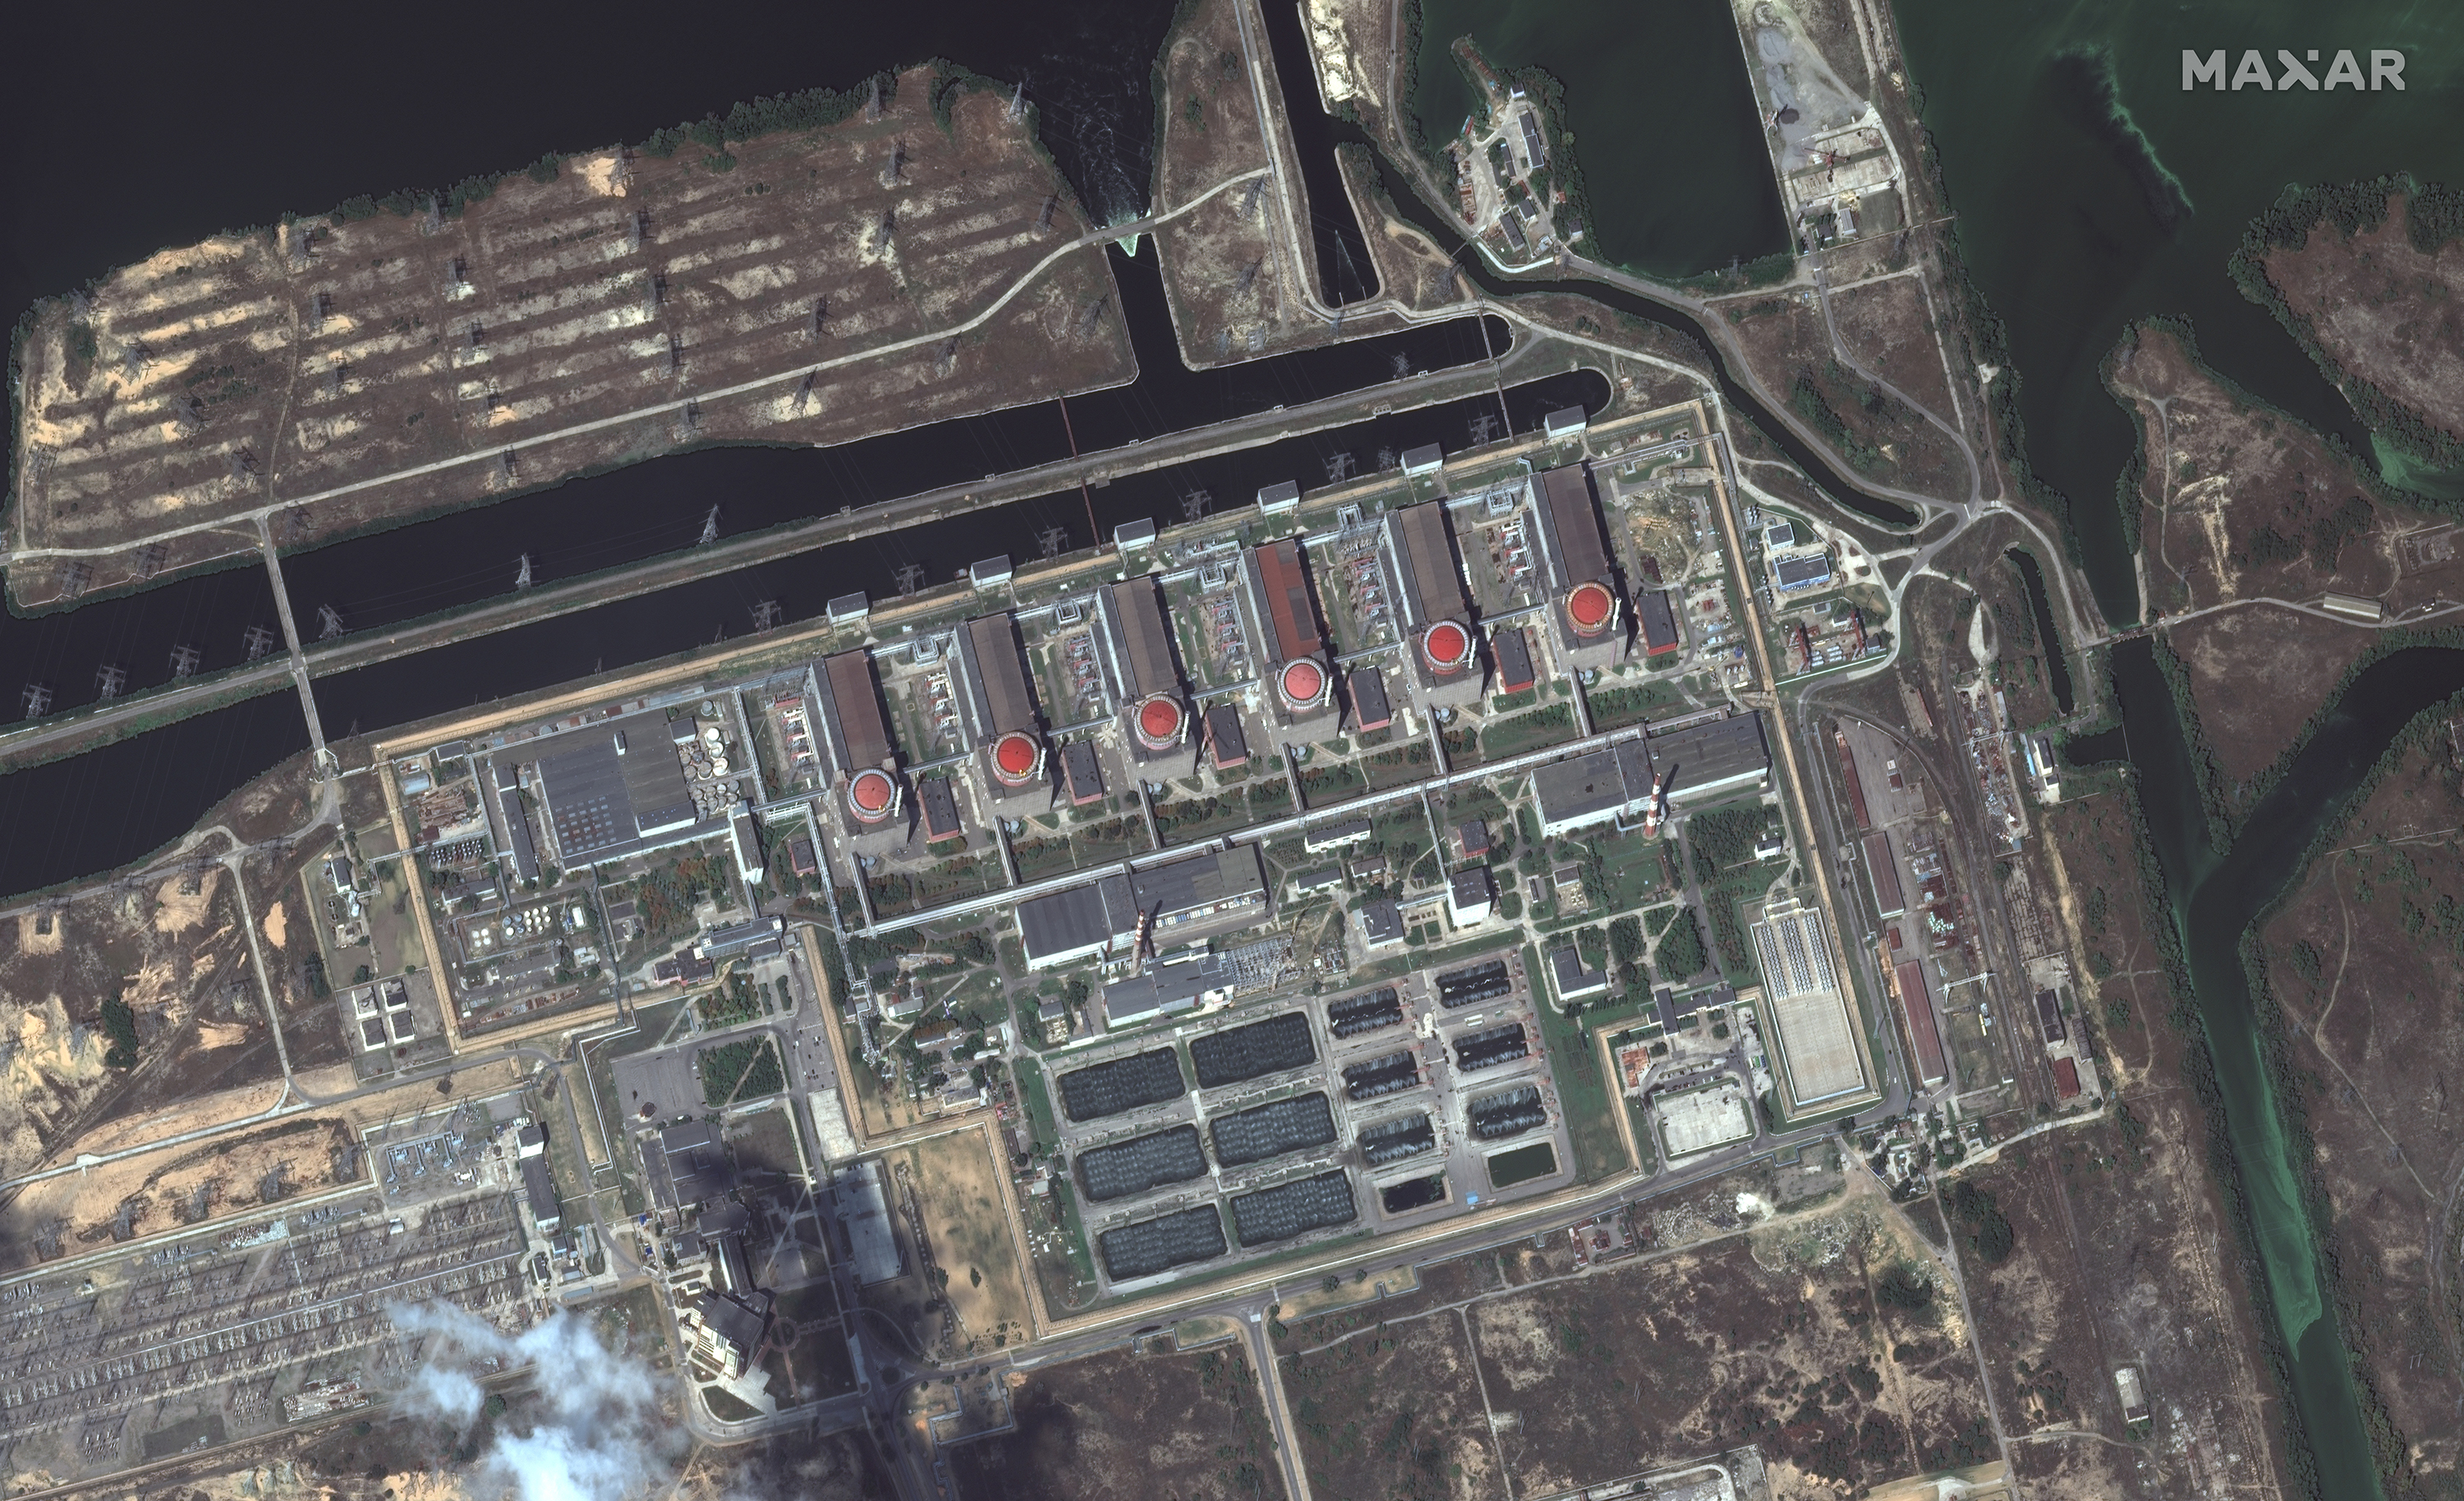 Overview of Zaporizhzhia nuclear power plant on August 19.